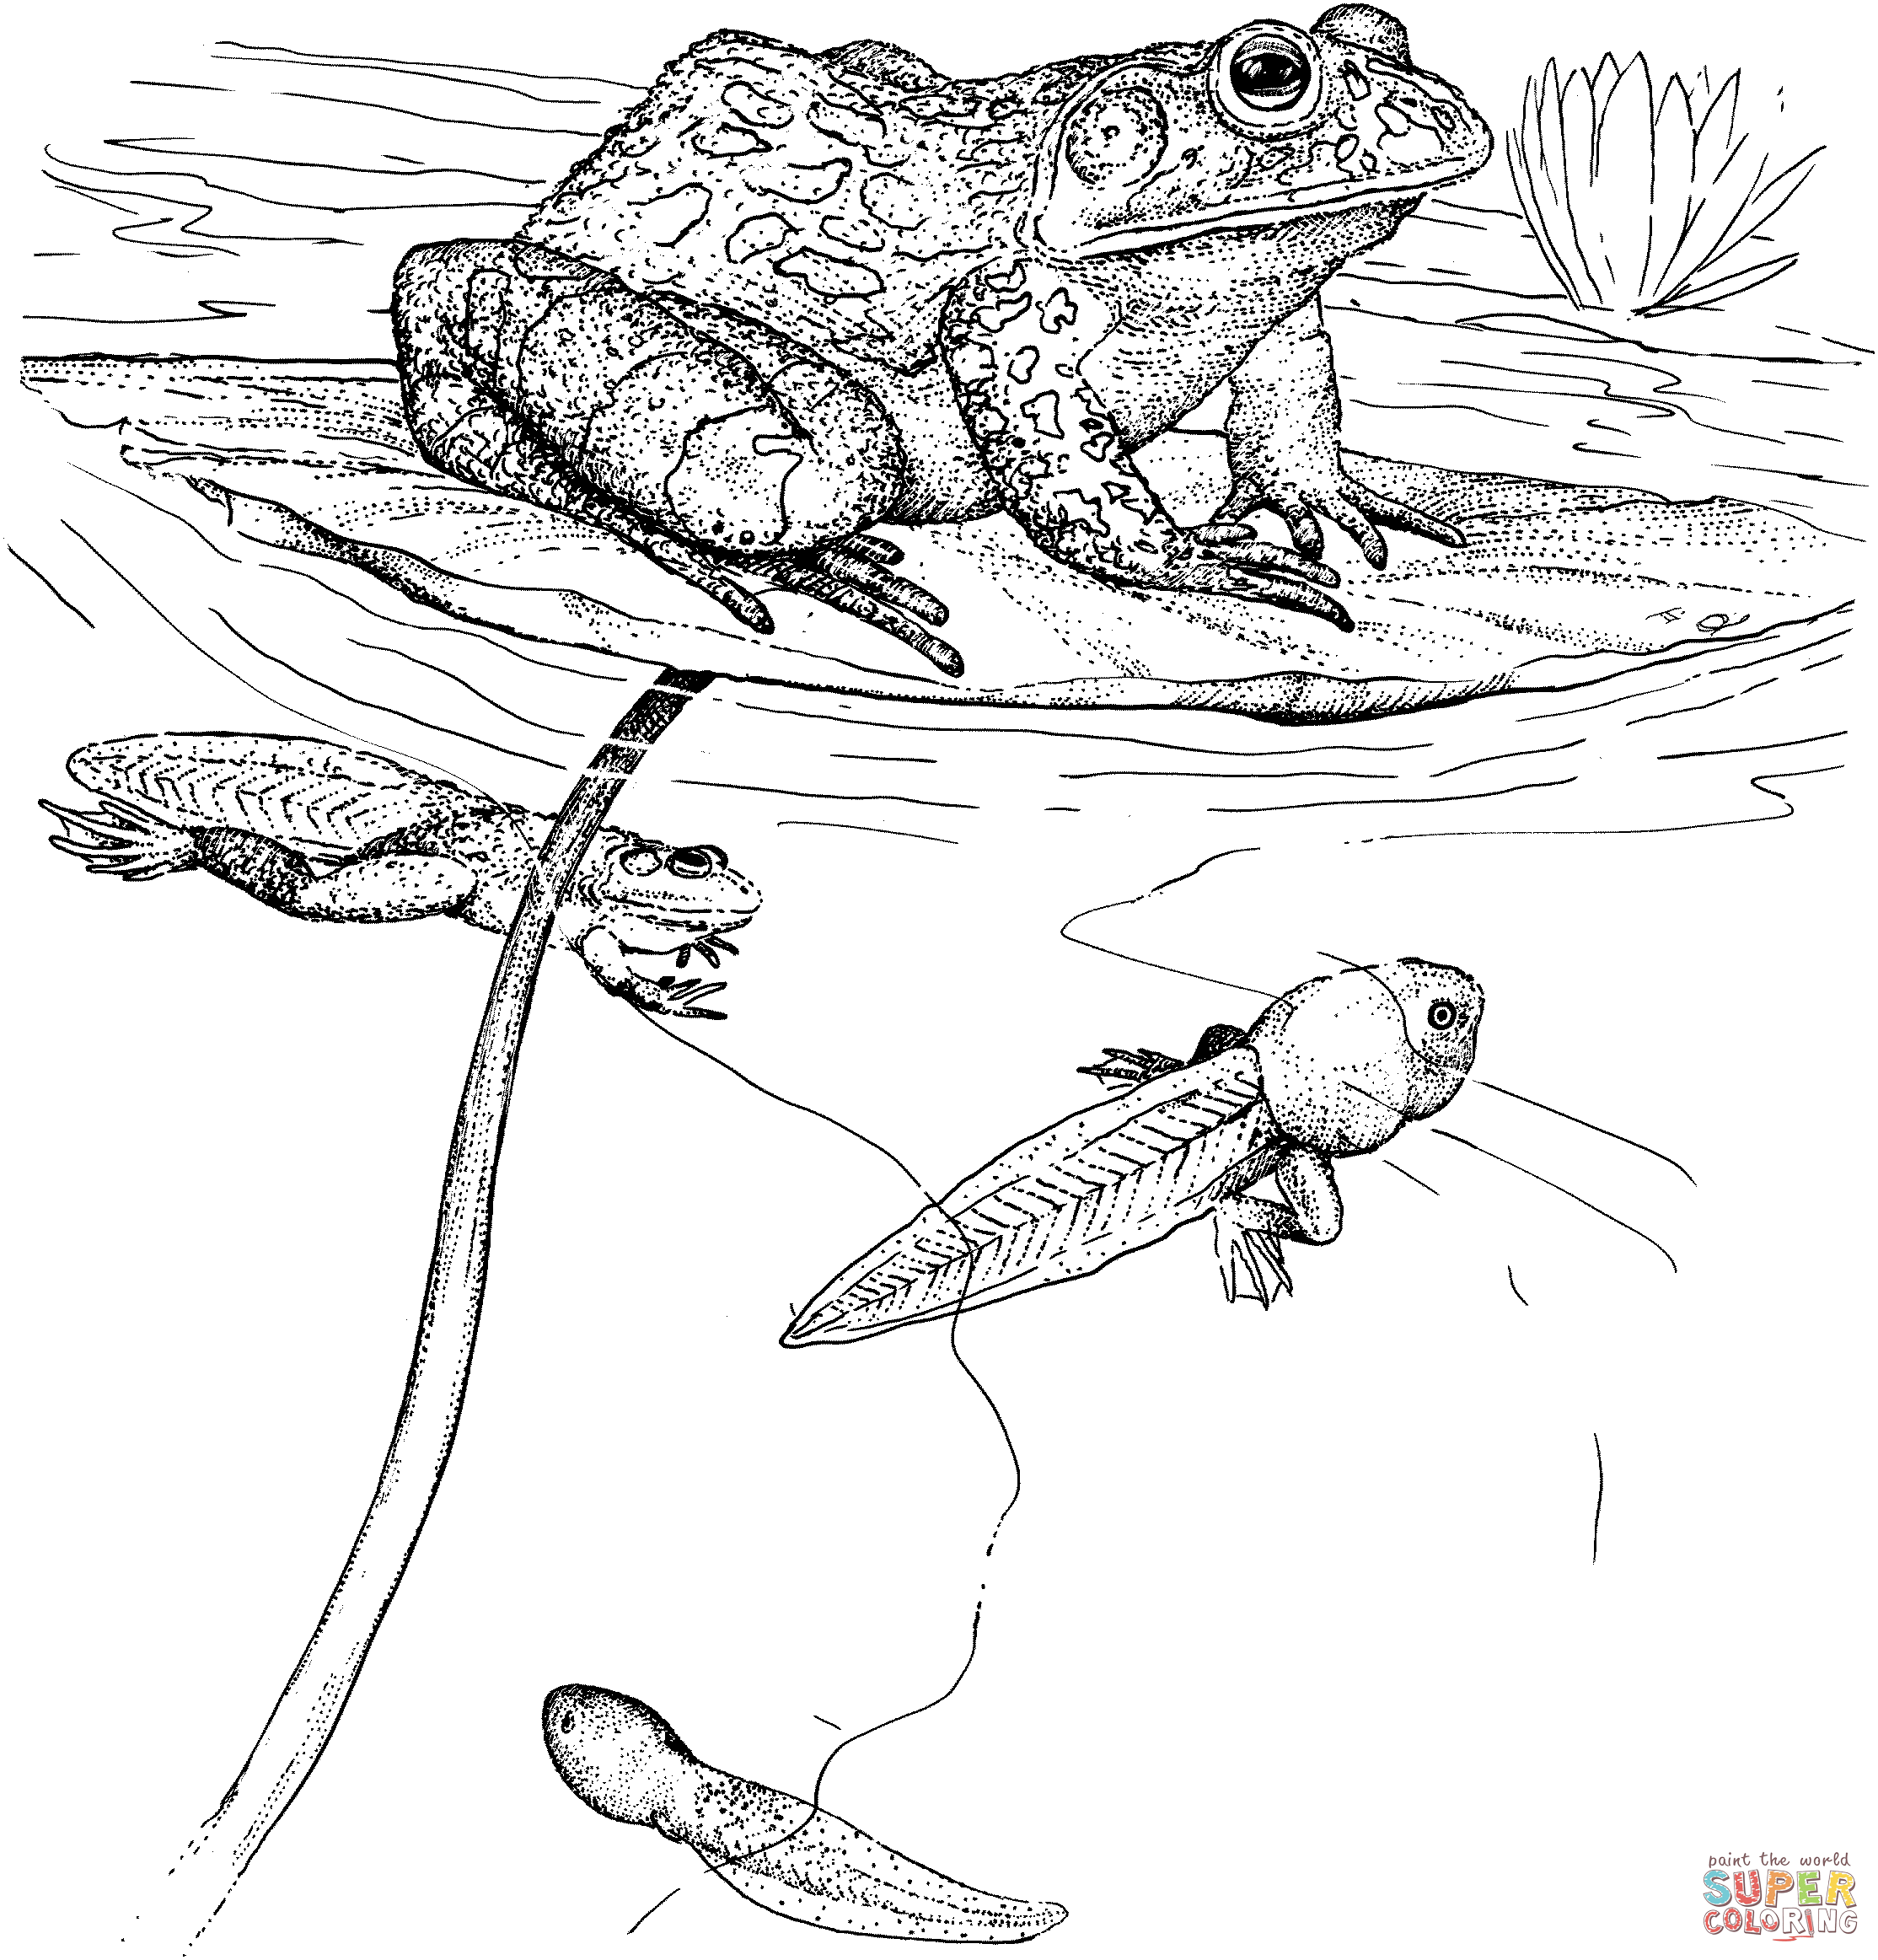 Tadpoles and Bullfrog Coloring page | Free Printable Coloring Pages